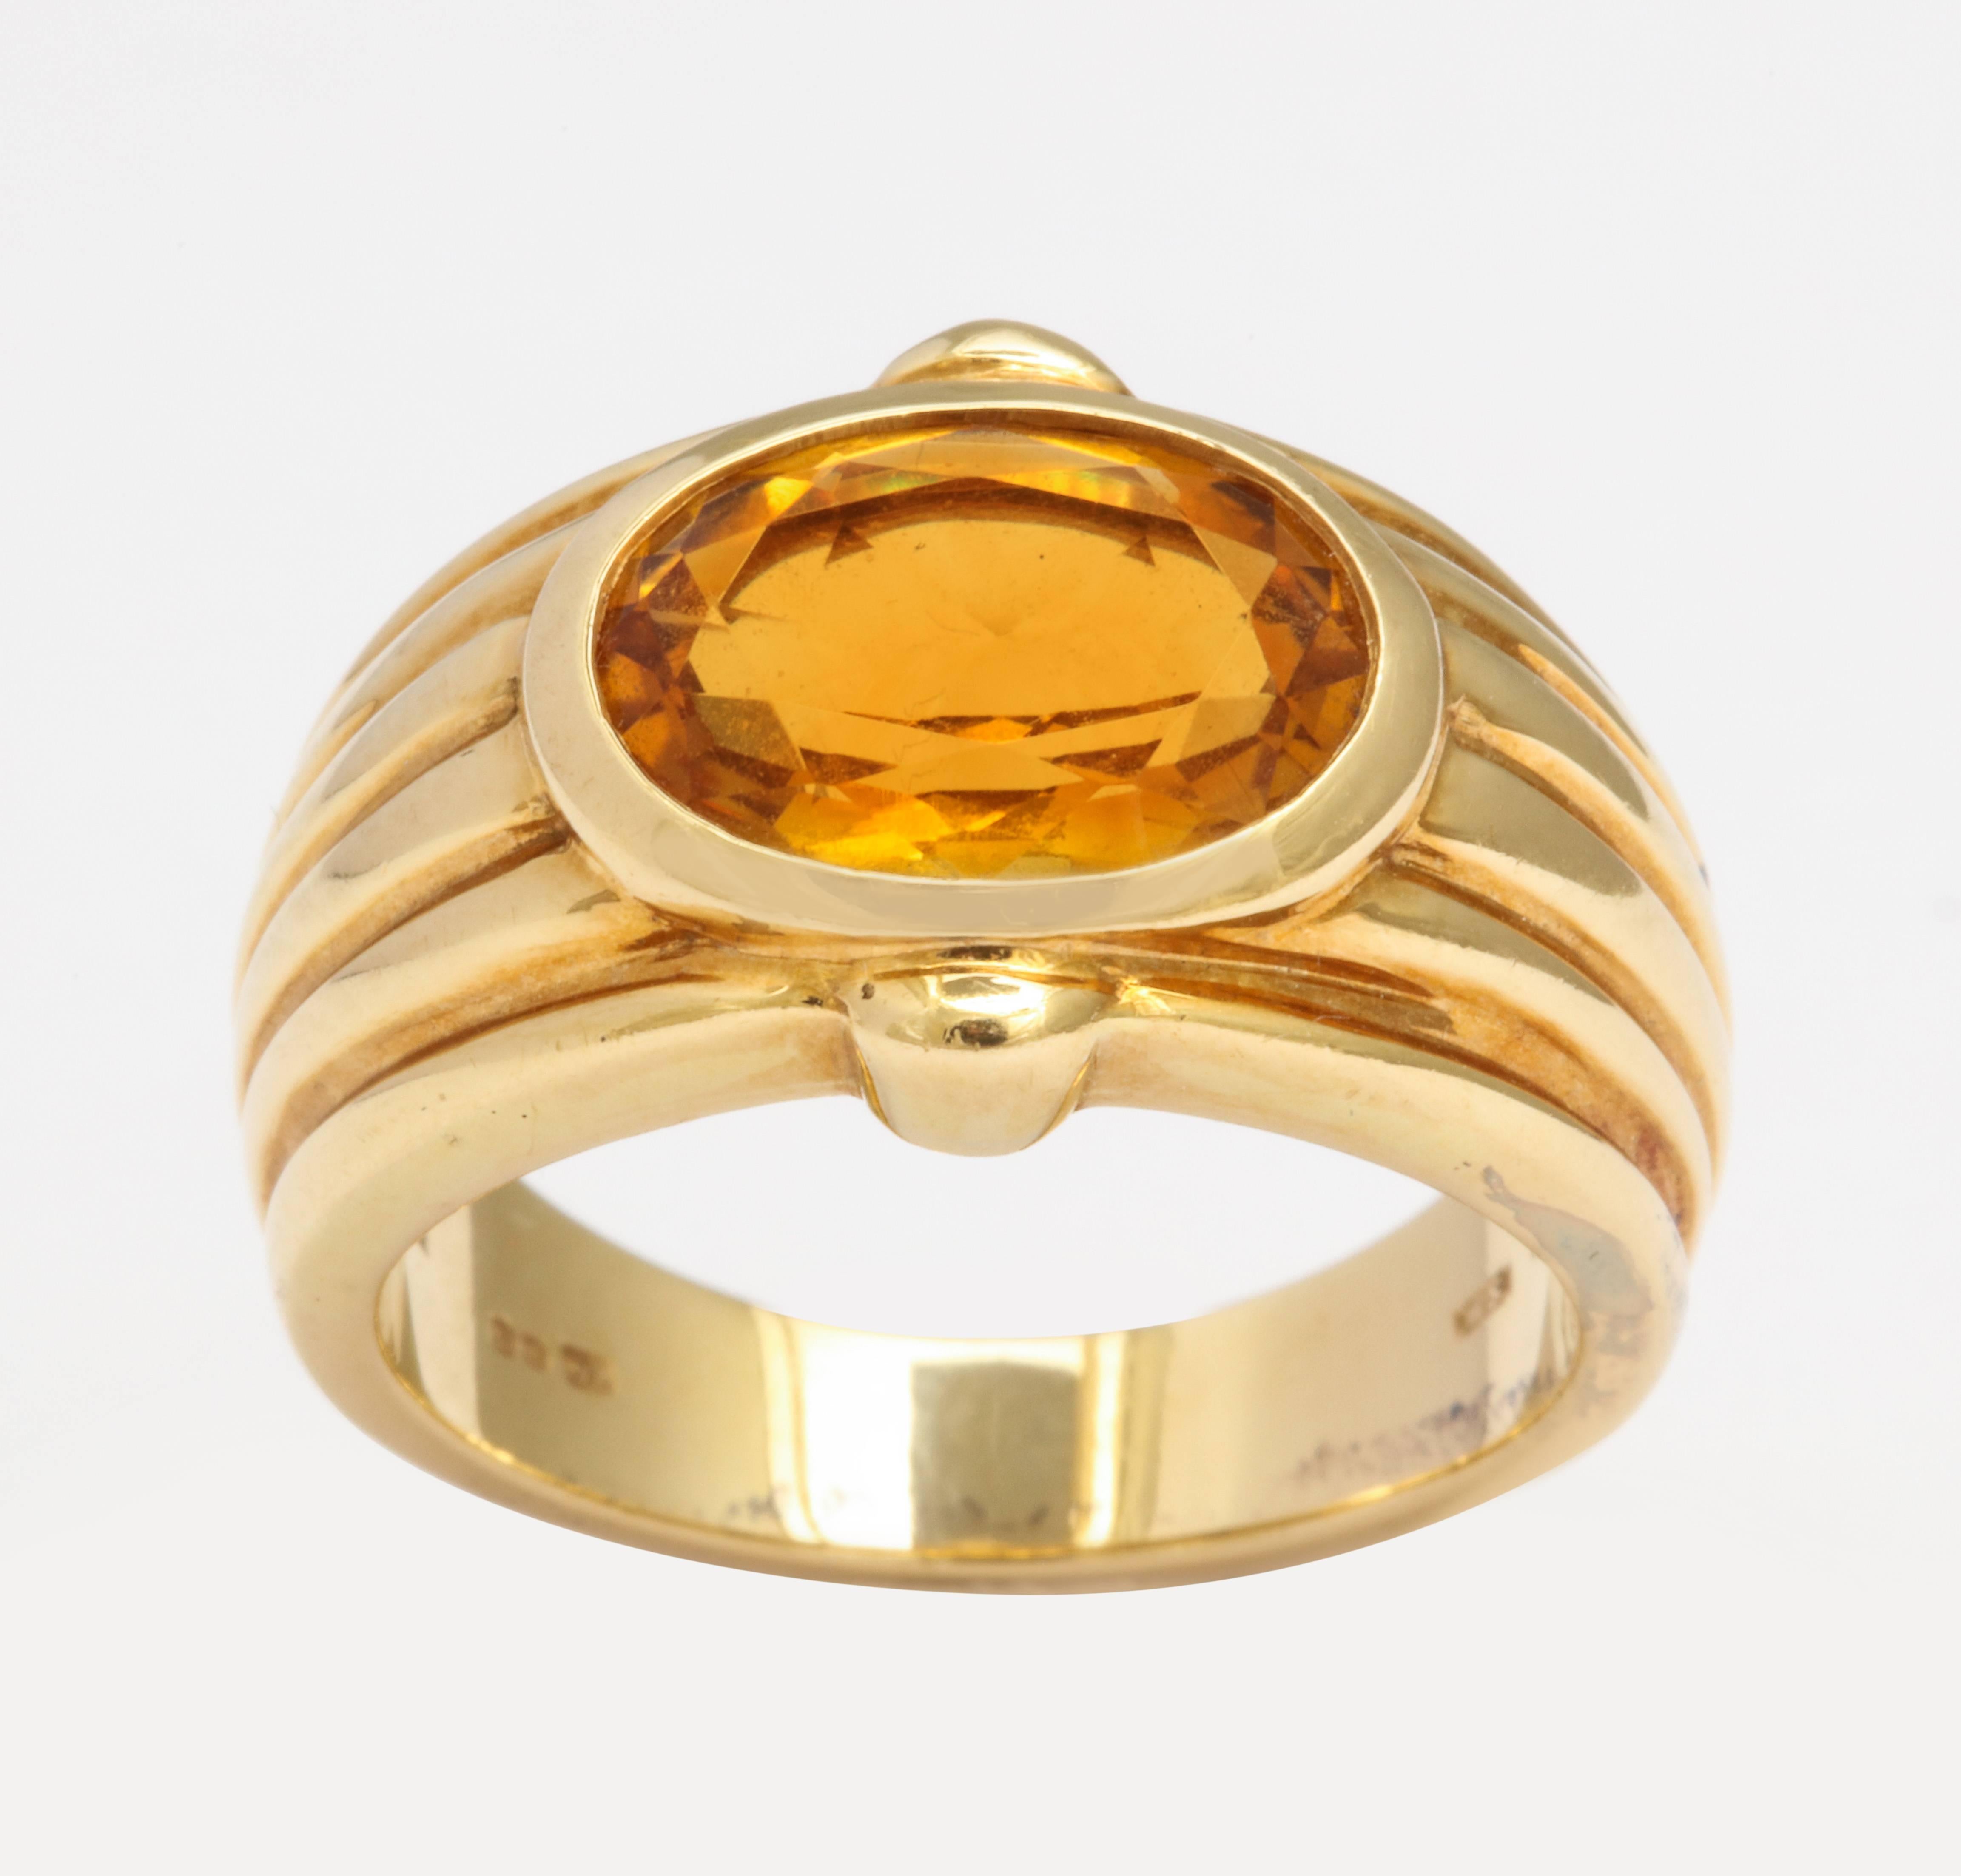 An 18 karat yellow gold ring set with an oval citrine weighing approximately 3.66 carats. Signed Bulgari with Italian makers marks. Ring size 6. 